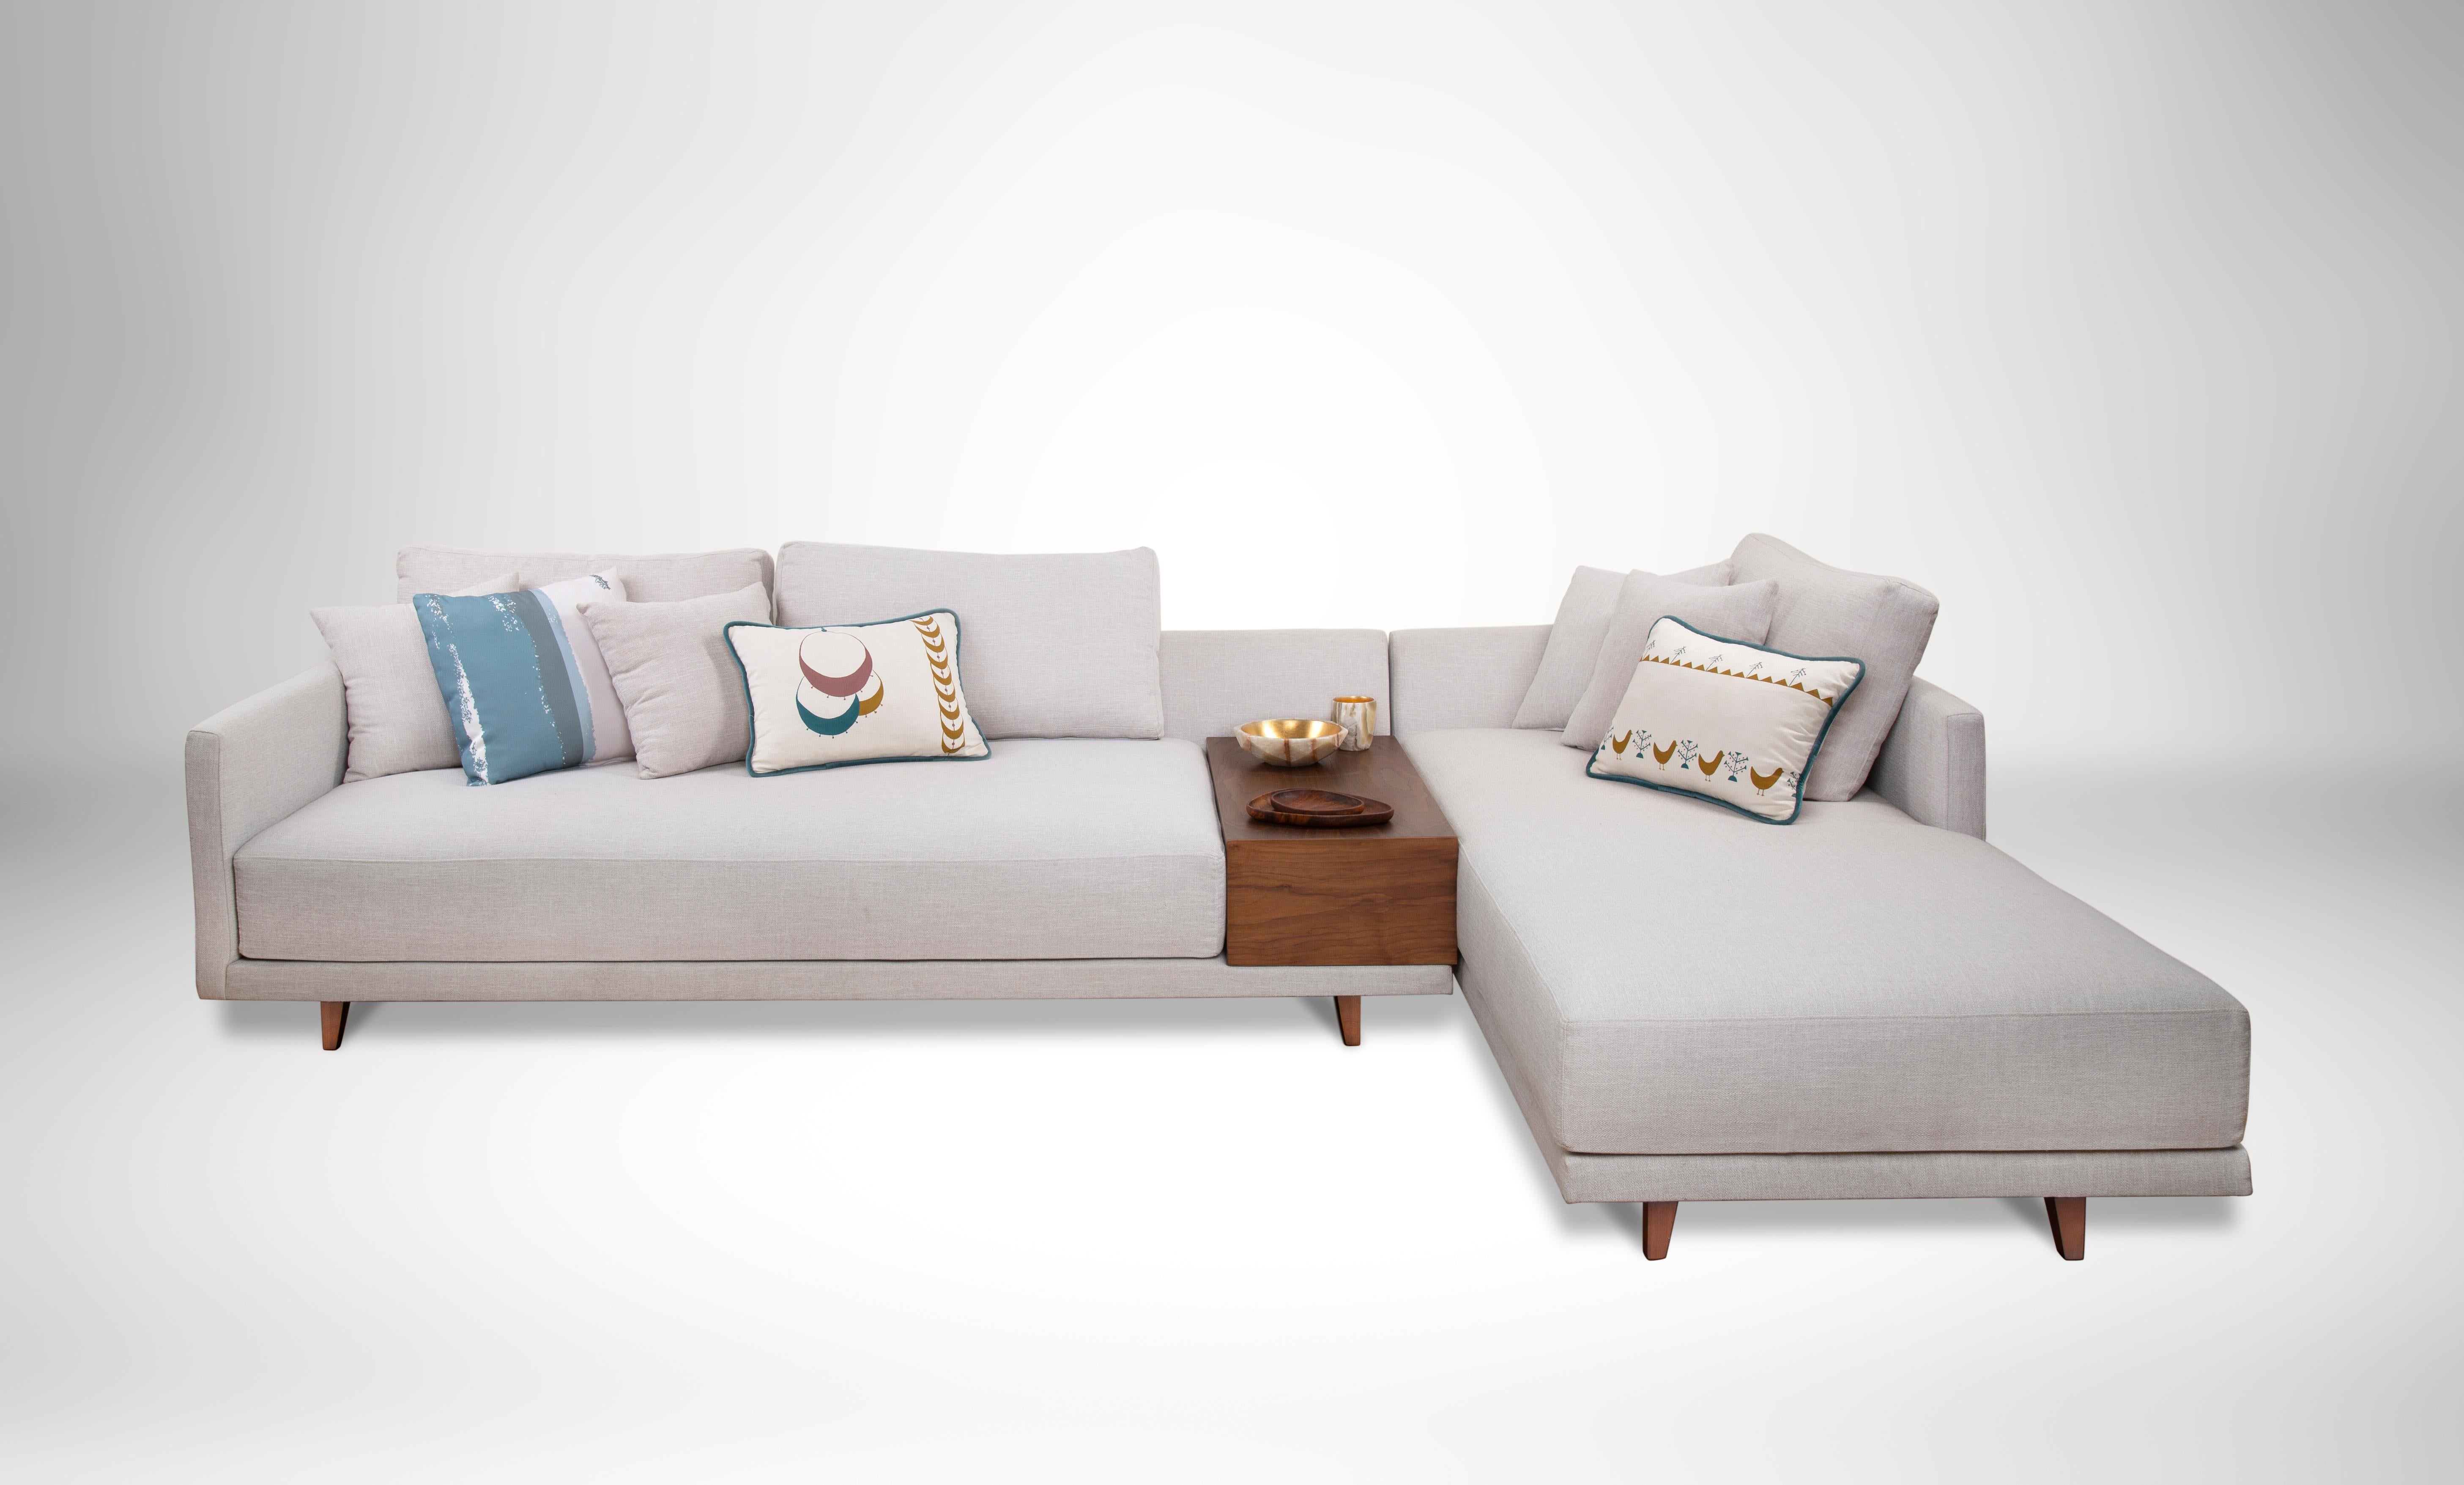 L-Shaped Sofa with Built-in Walnut Side Table with Foam and Fiber Filling.
Clean lines and an embedded Walnut wood tray make this L-shaped sofa feel like a floating island. Our Floating sofa's frame is made of wood, with a moveable built-in side